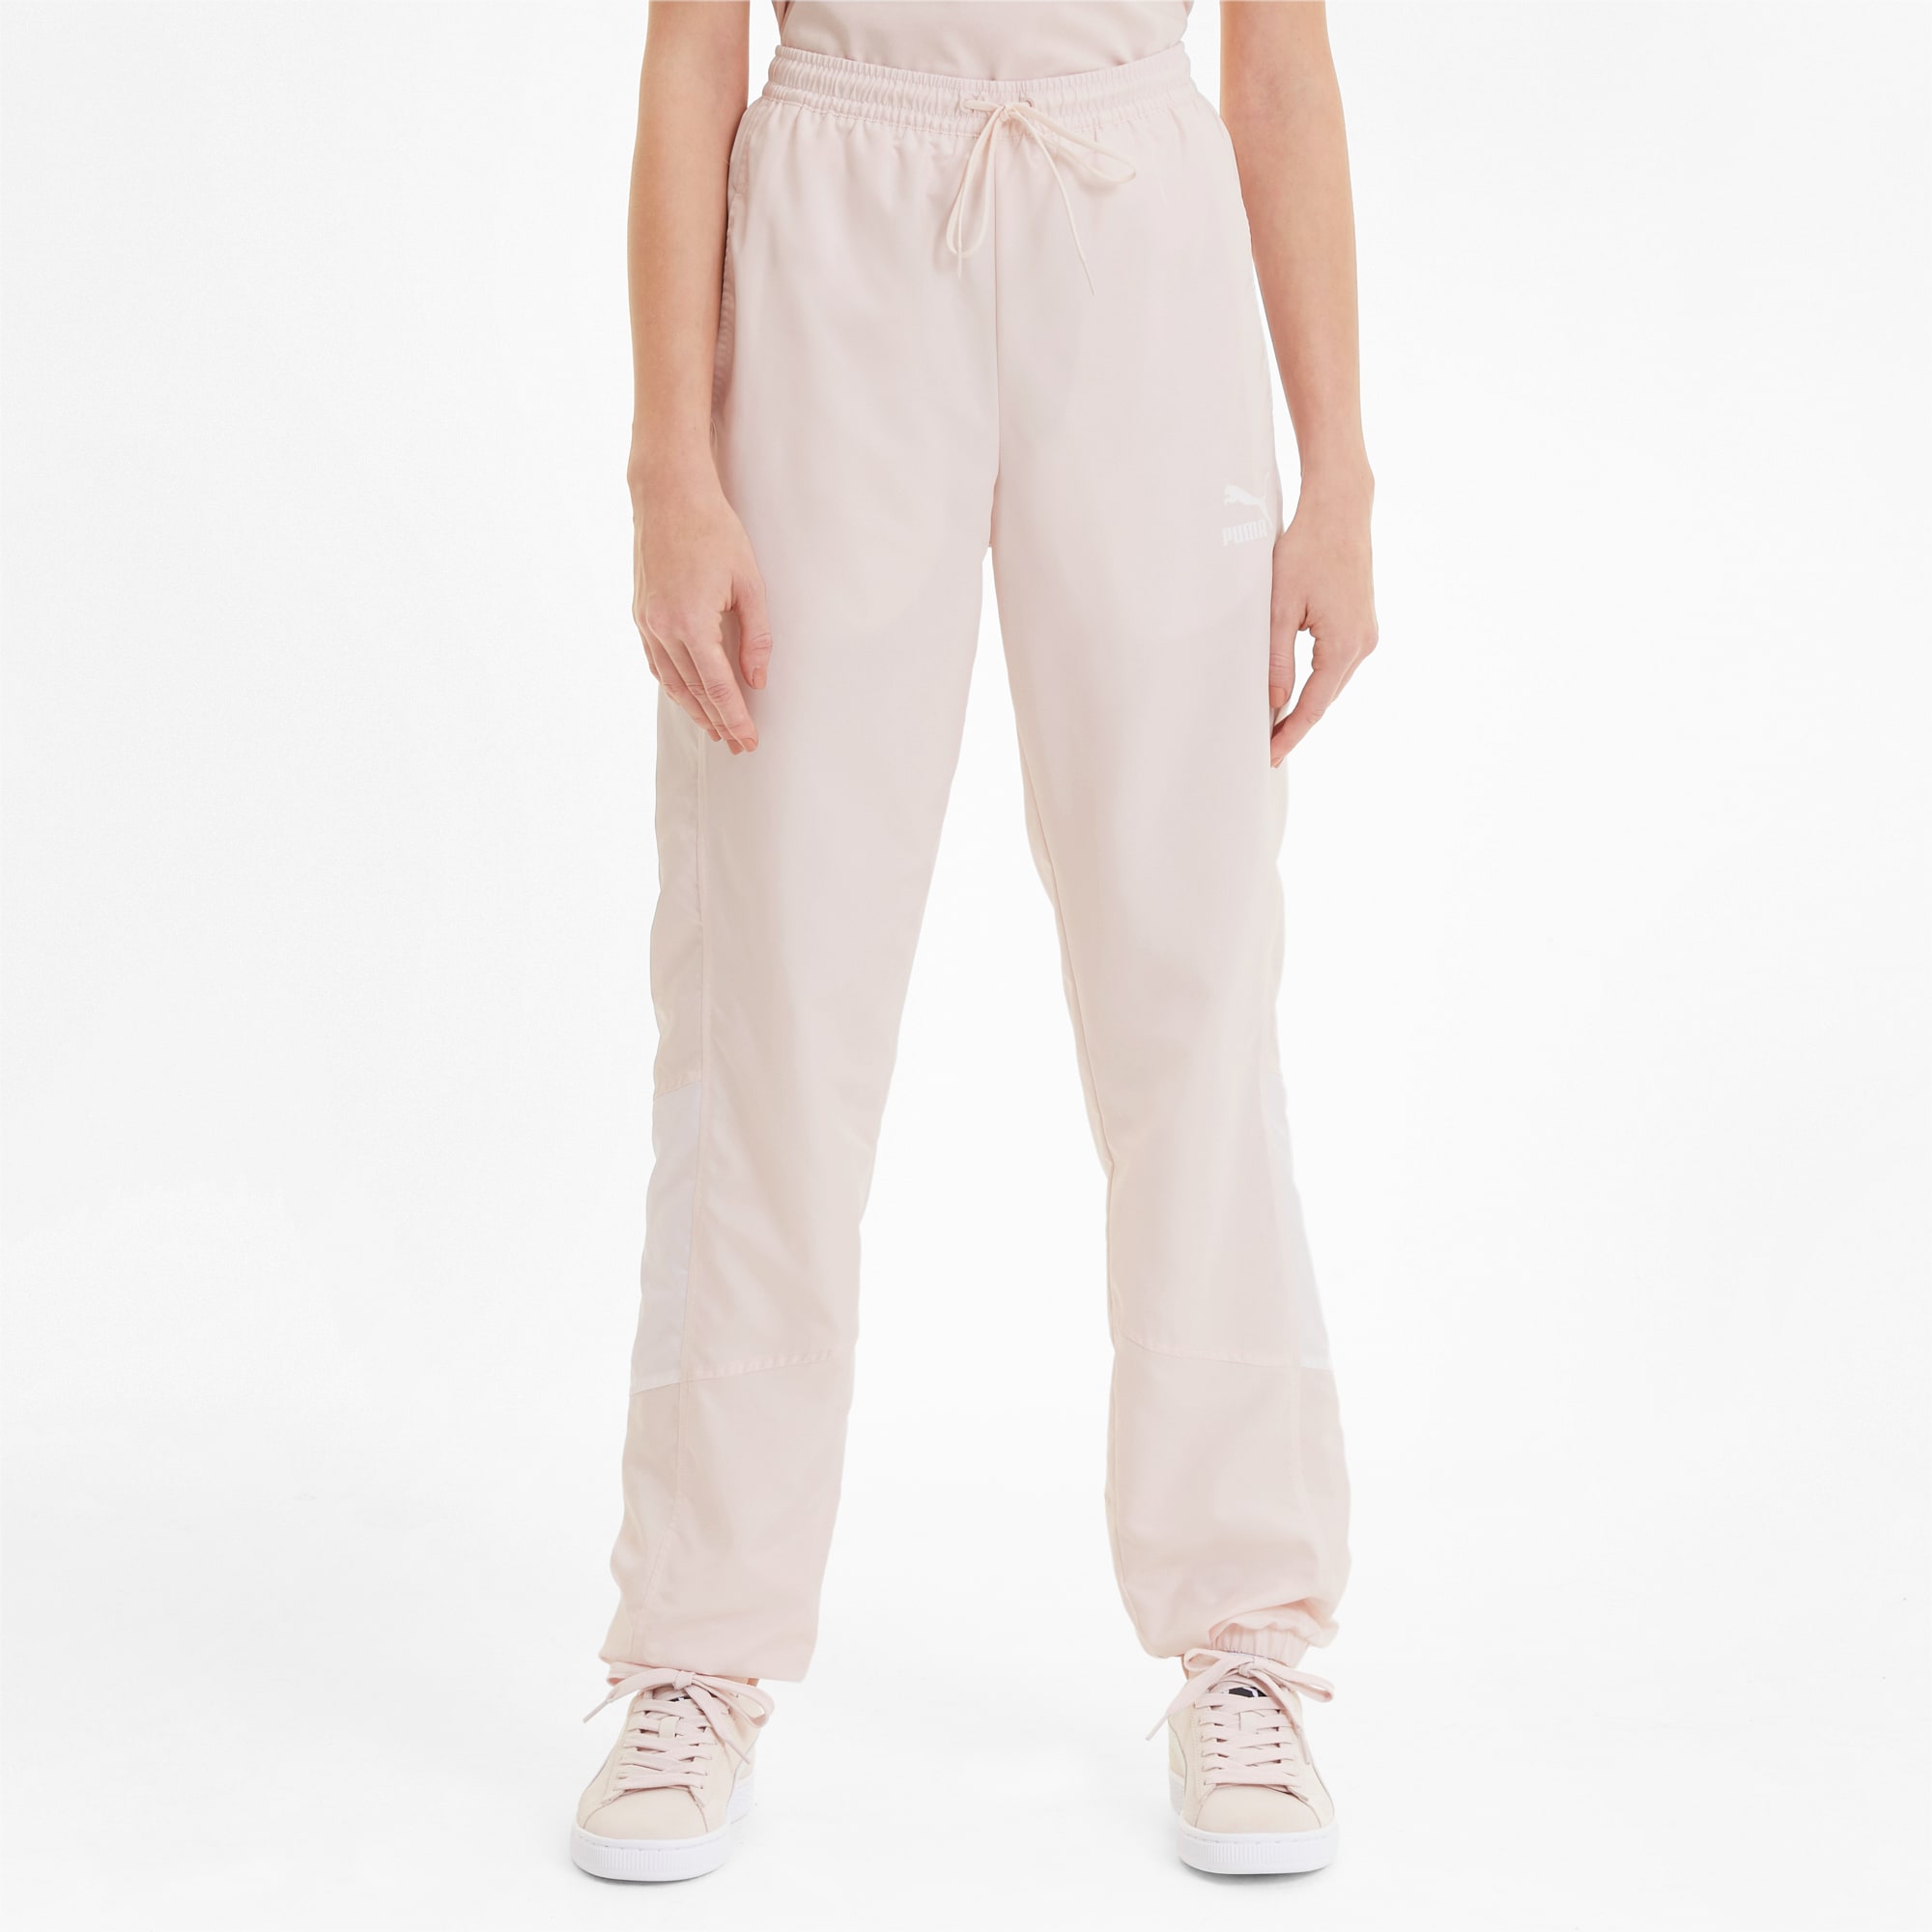 winter track pants for ladies